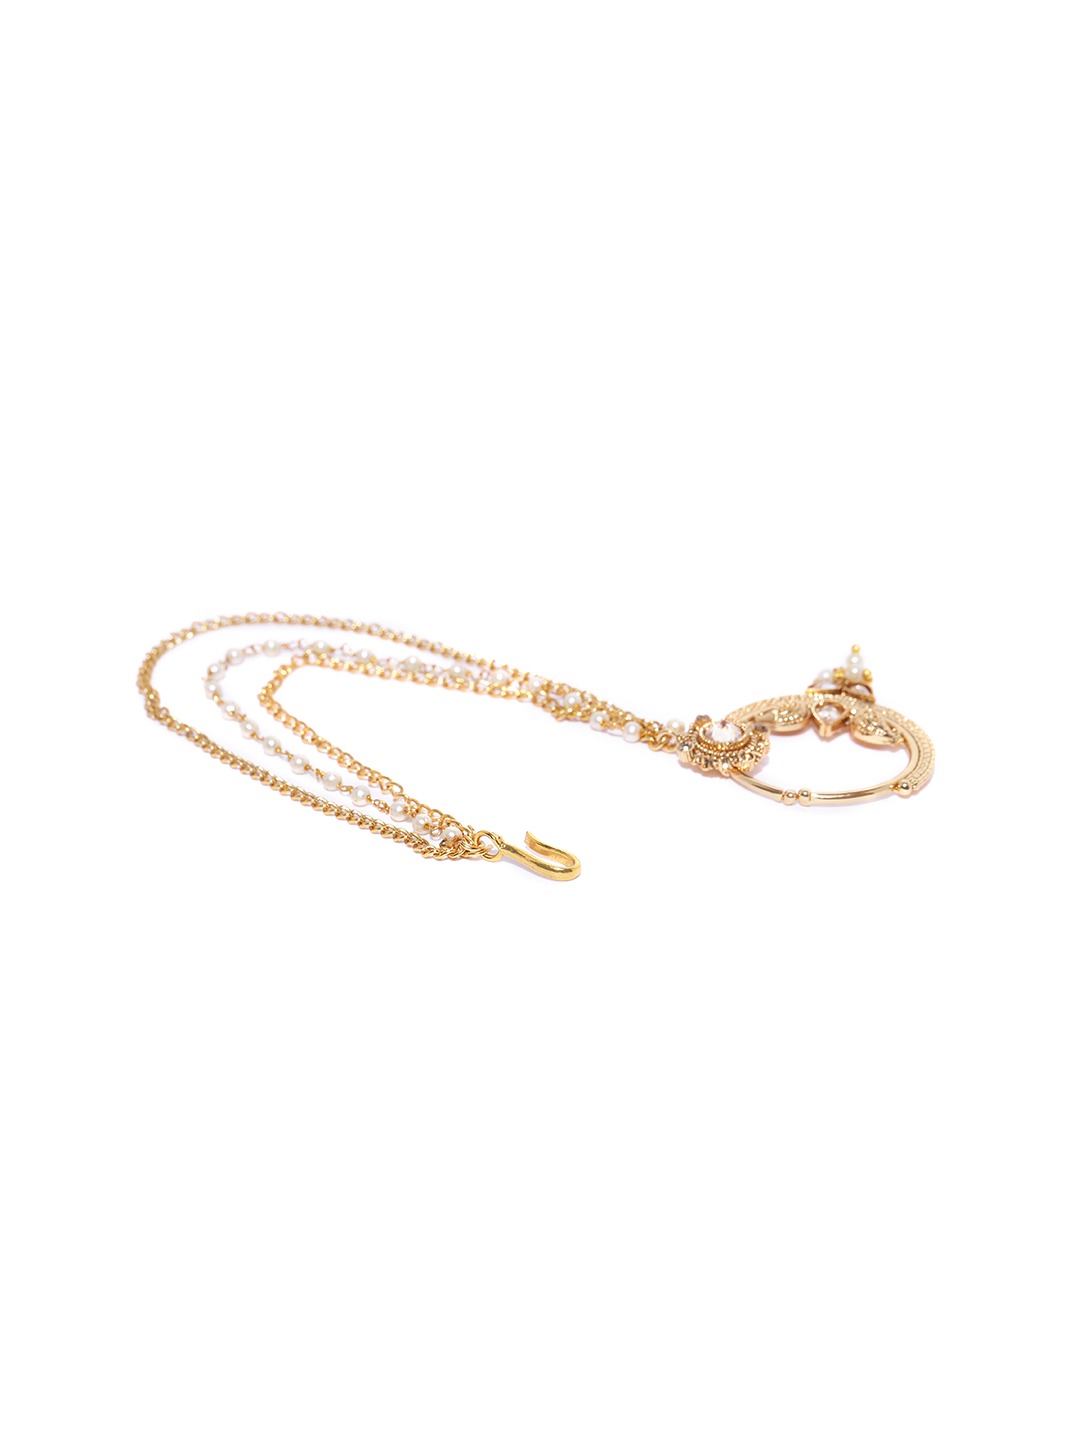 Traditional Gold Plated NoseRing/Nath With Pearl Chain For Women And Girls